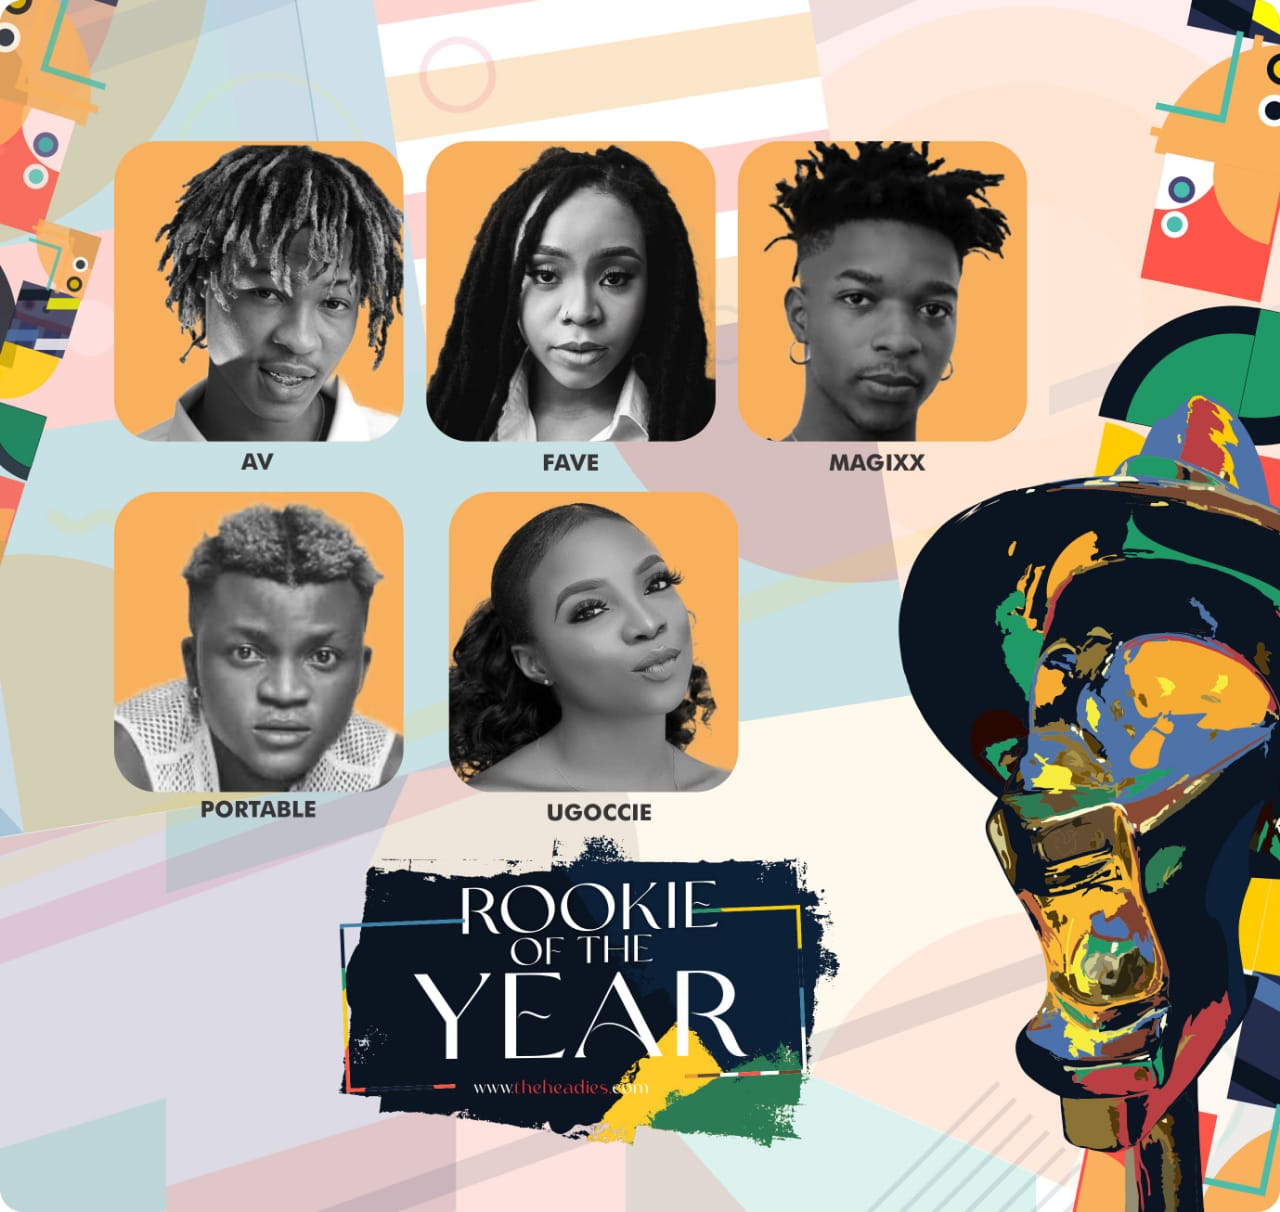 Wizkid - 2022 Headies Award Nominees (Full List) - Portable Gets Double Nominations 15475272_img20220524wa0034_jpeg152461e83e4bed7085fbbf8d54eee5d6